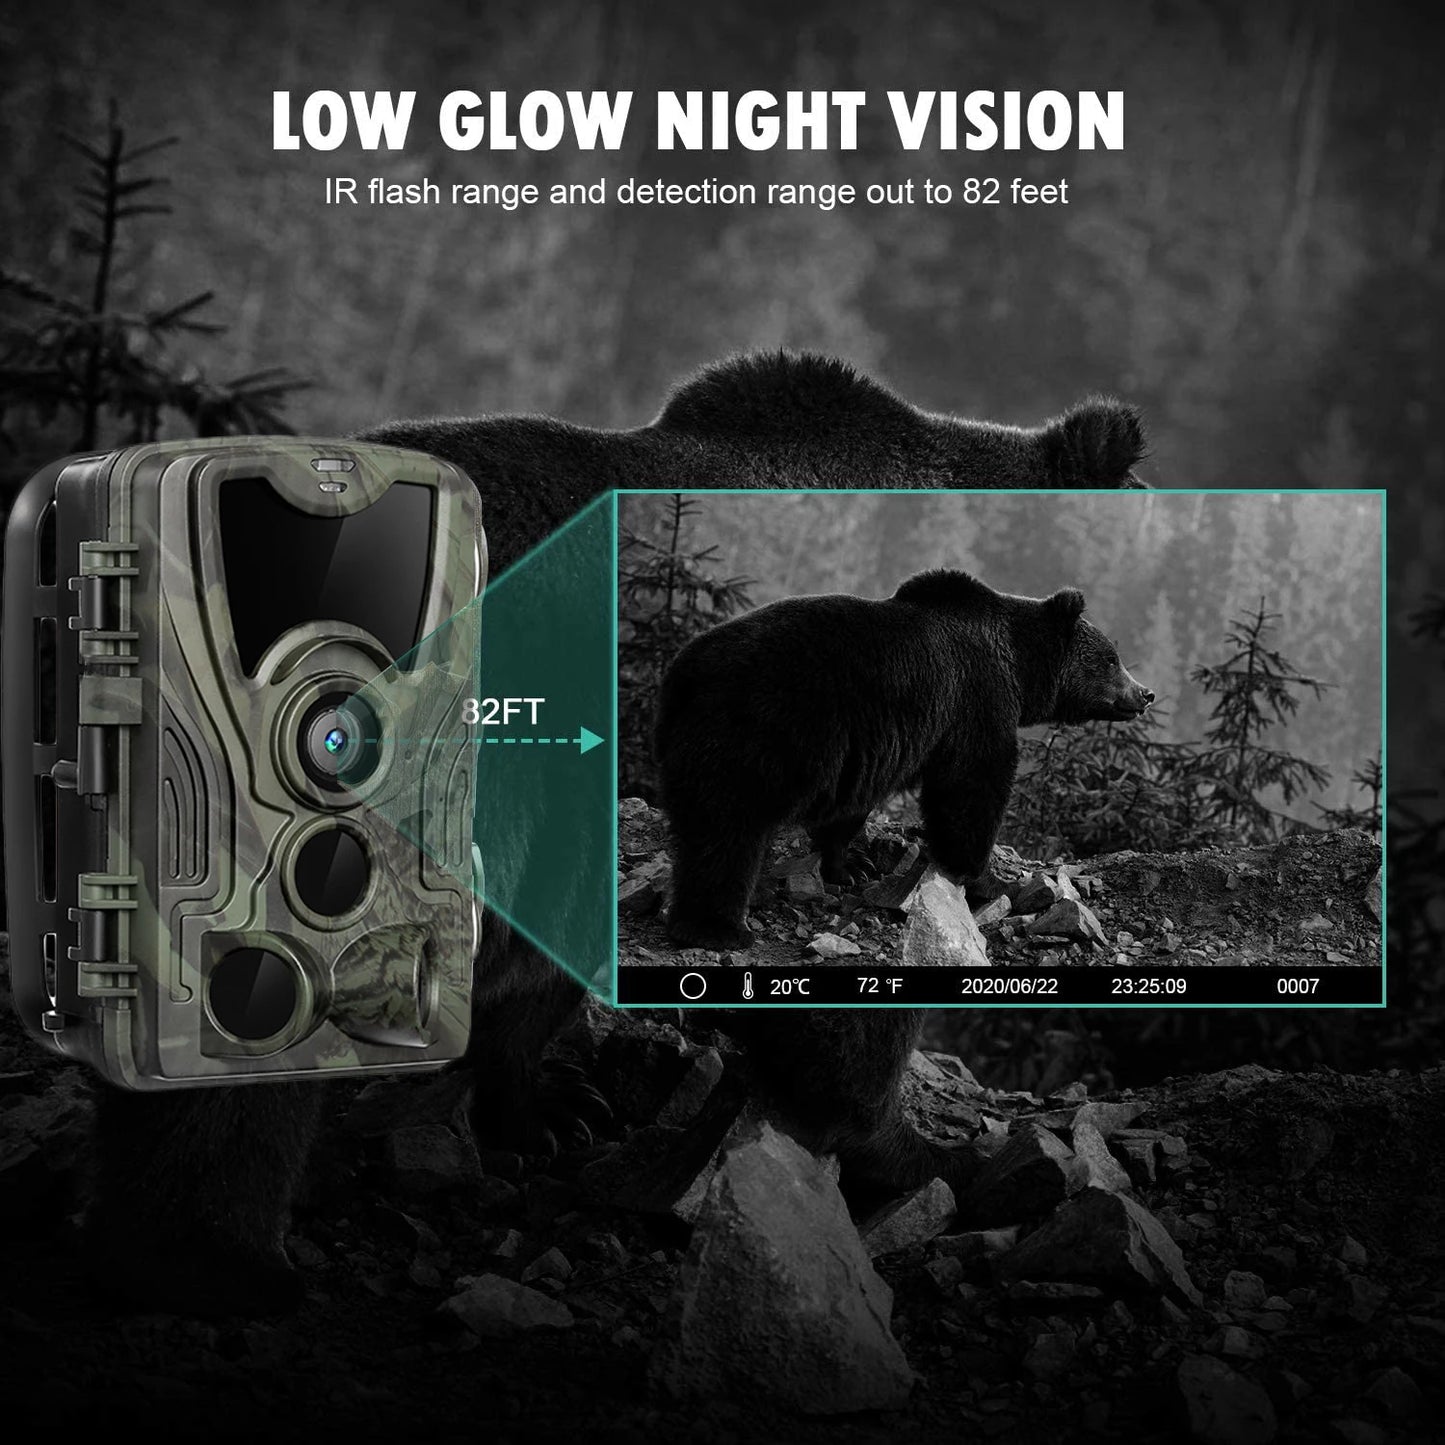 Outdoor 24MP 1080P Hunting Camera 5000 MAh Lithium Battery Night Vision Observation Camera Farm Orchard Home Security Camera